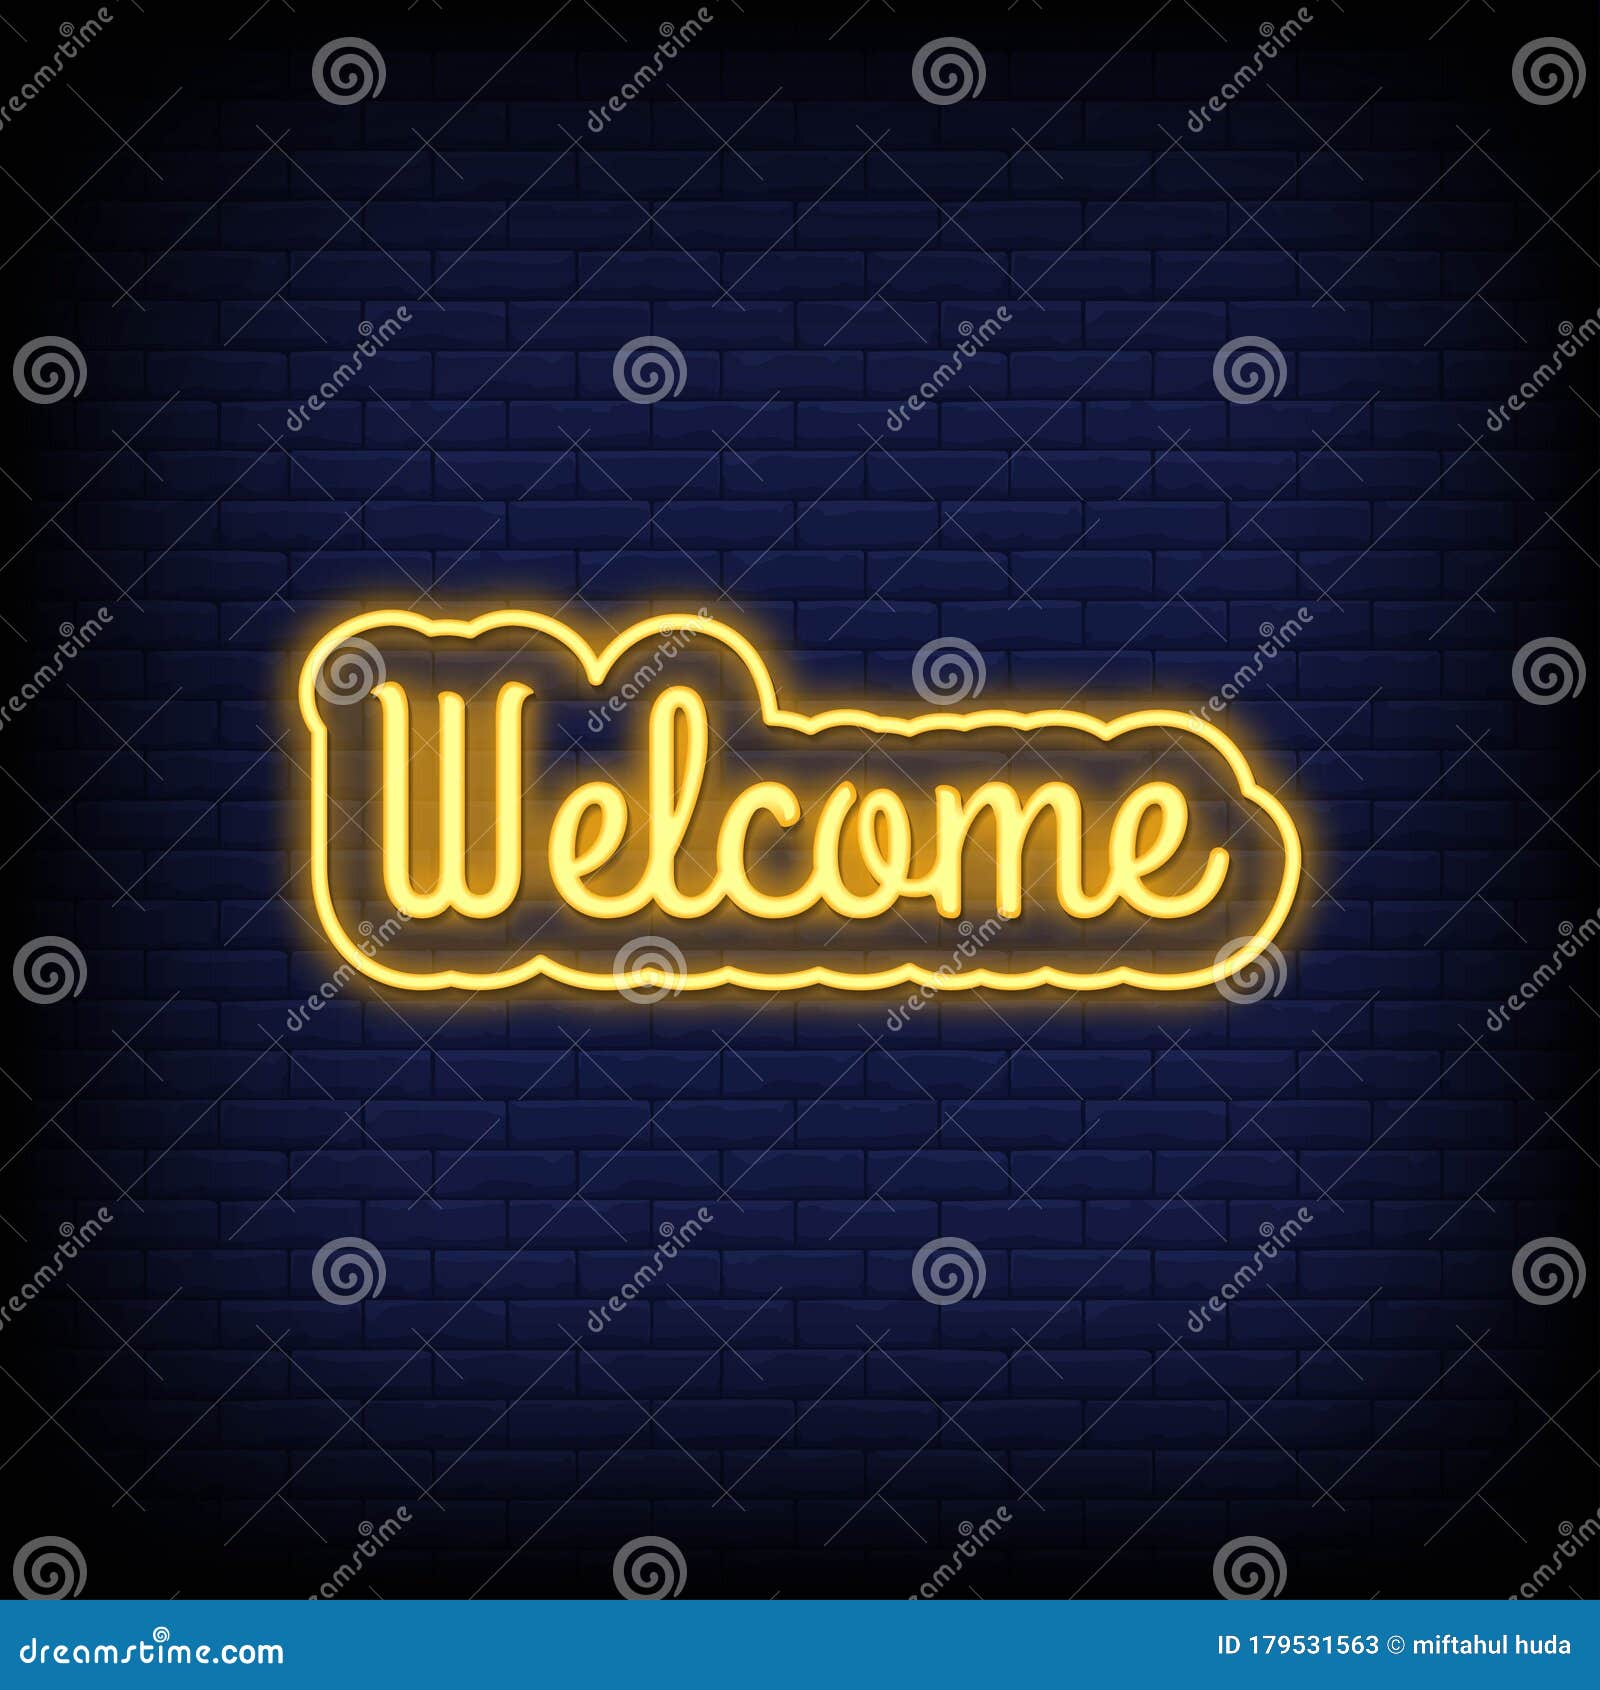 Welcome Neon Signs Style Text Vector Stock Vector - Illustration of ...